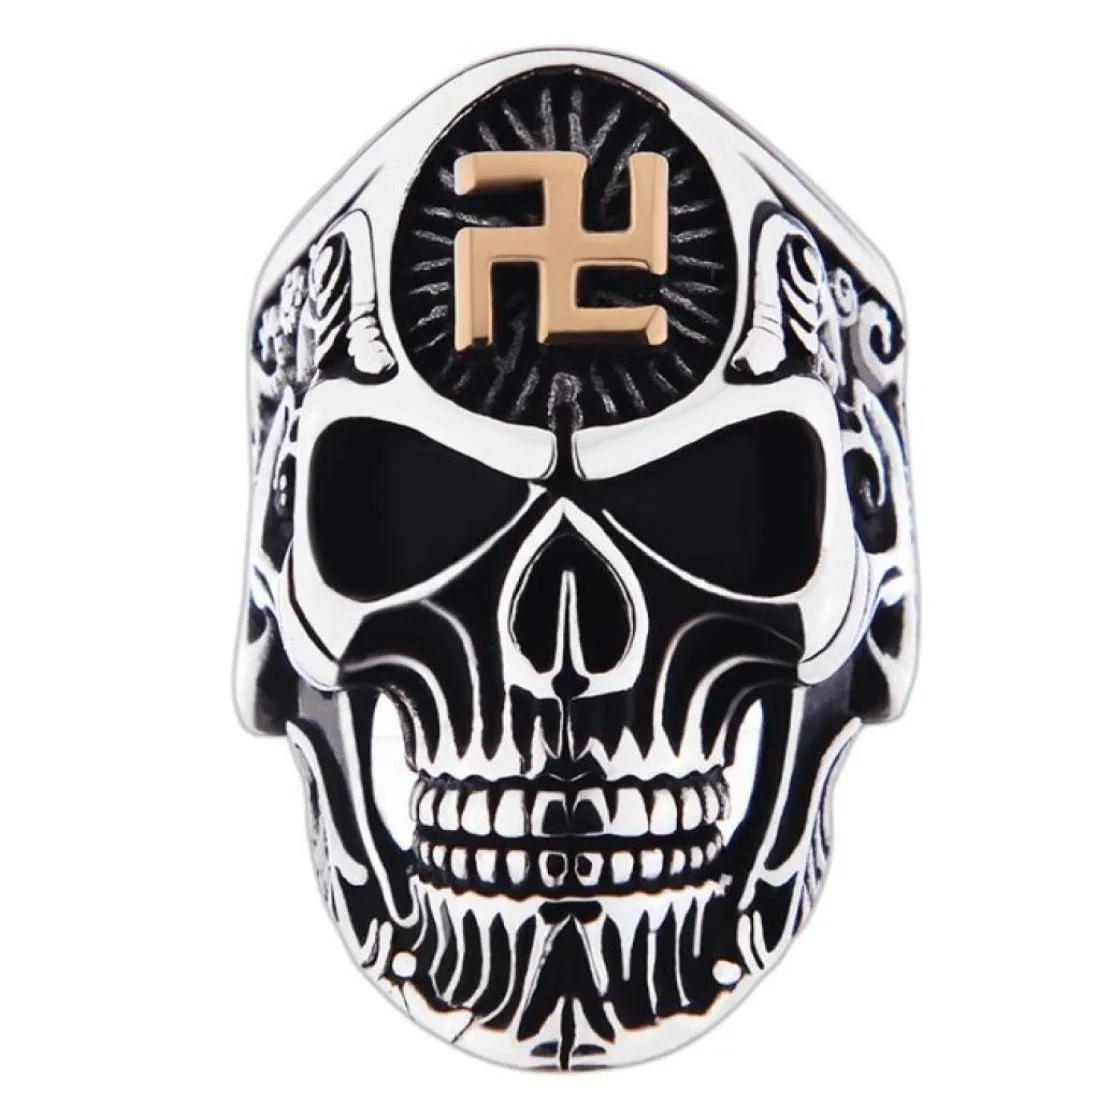 Stainless Steel Big Skull Ring For Men Jewelry Vintage Style Rings High Quality Rings for 69440431047425